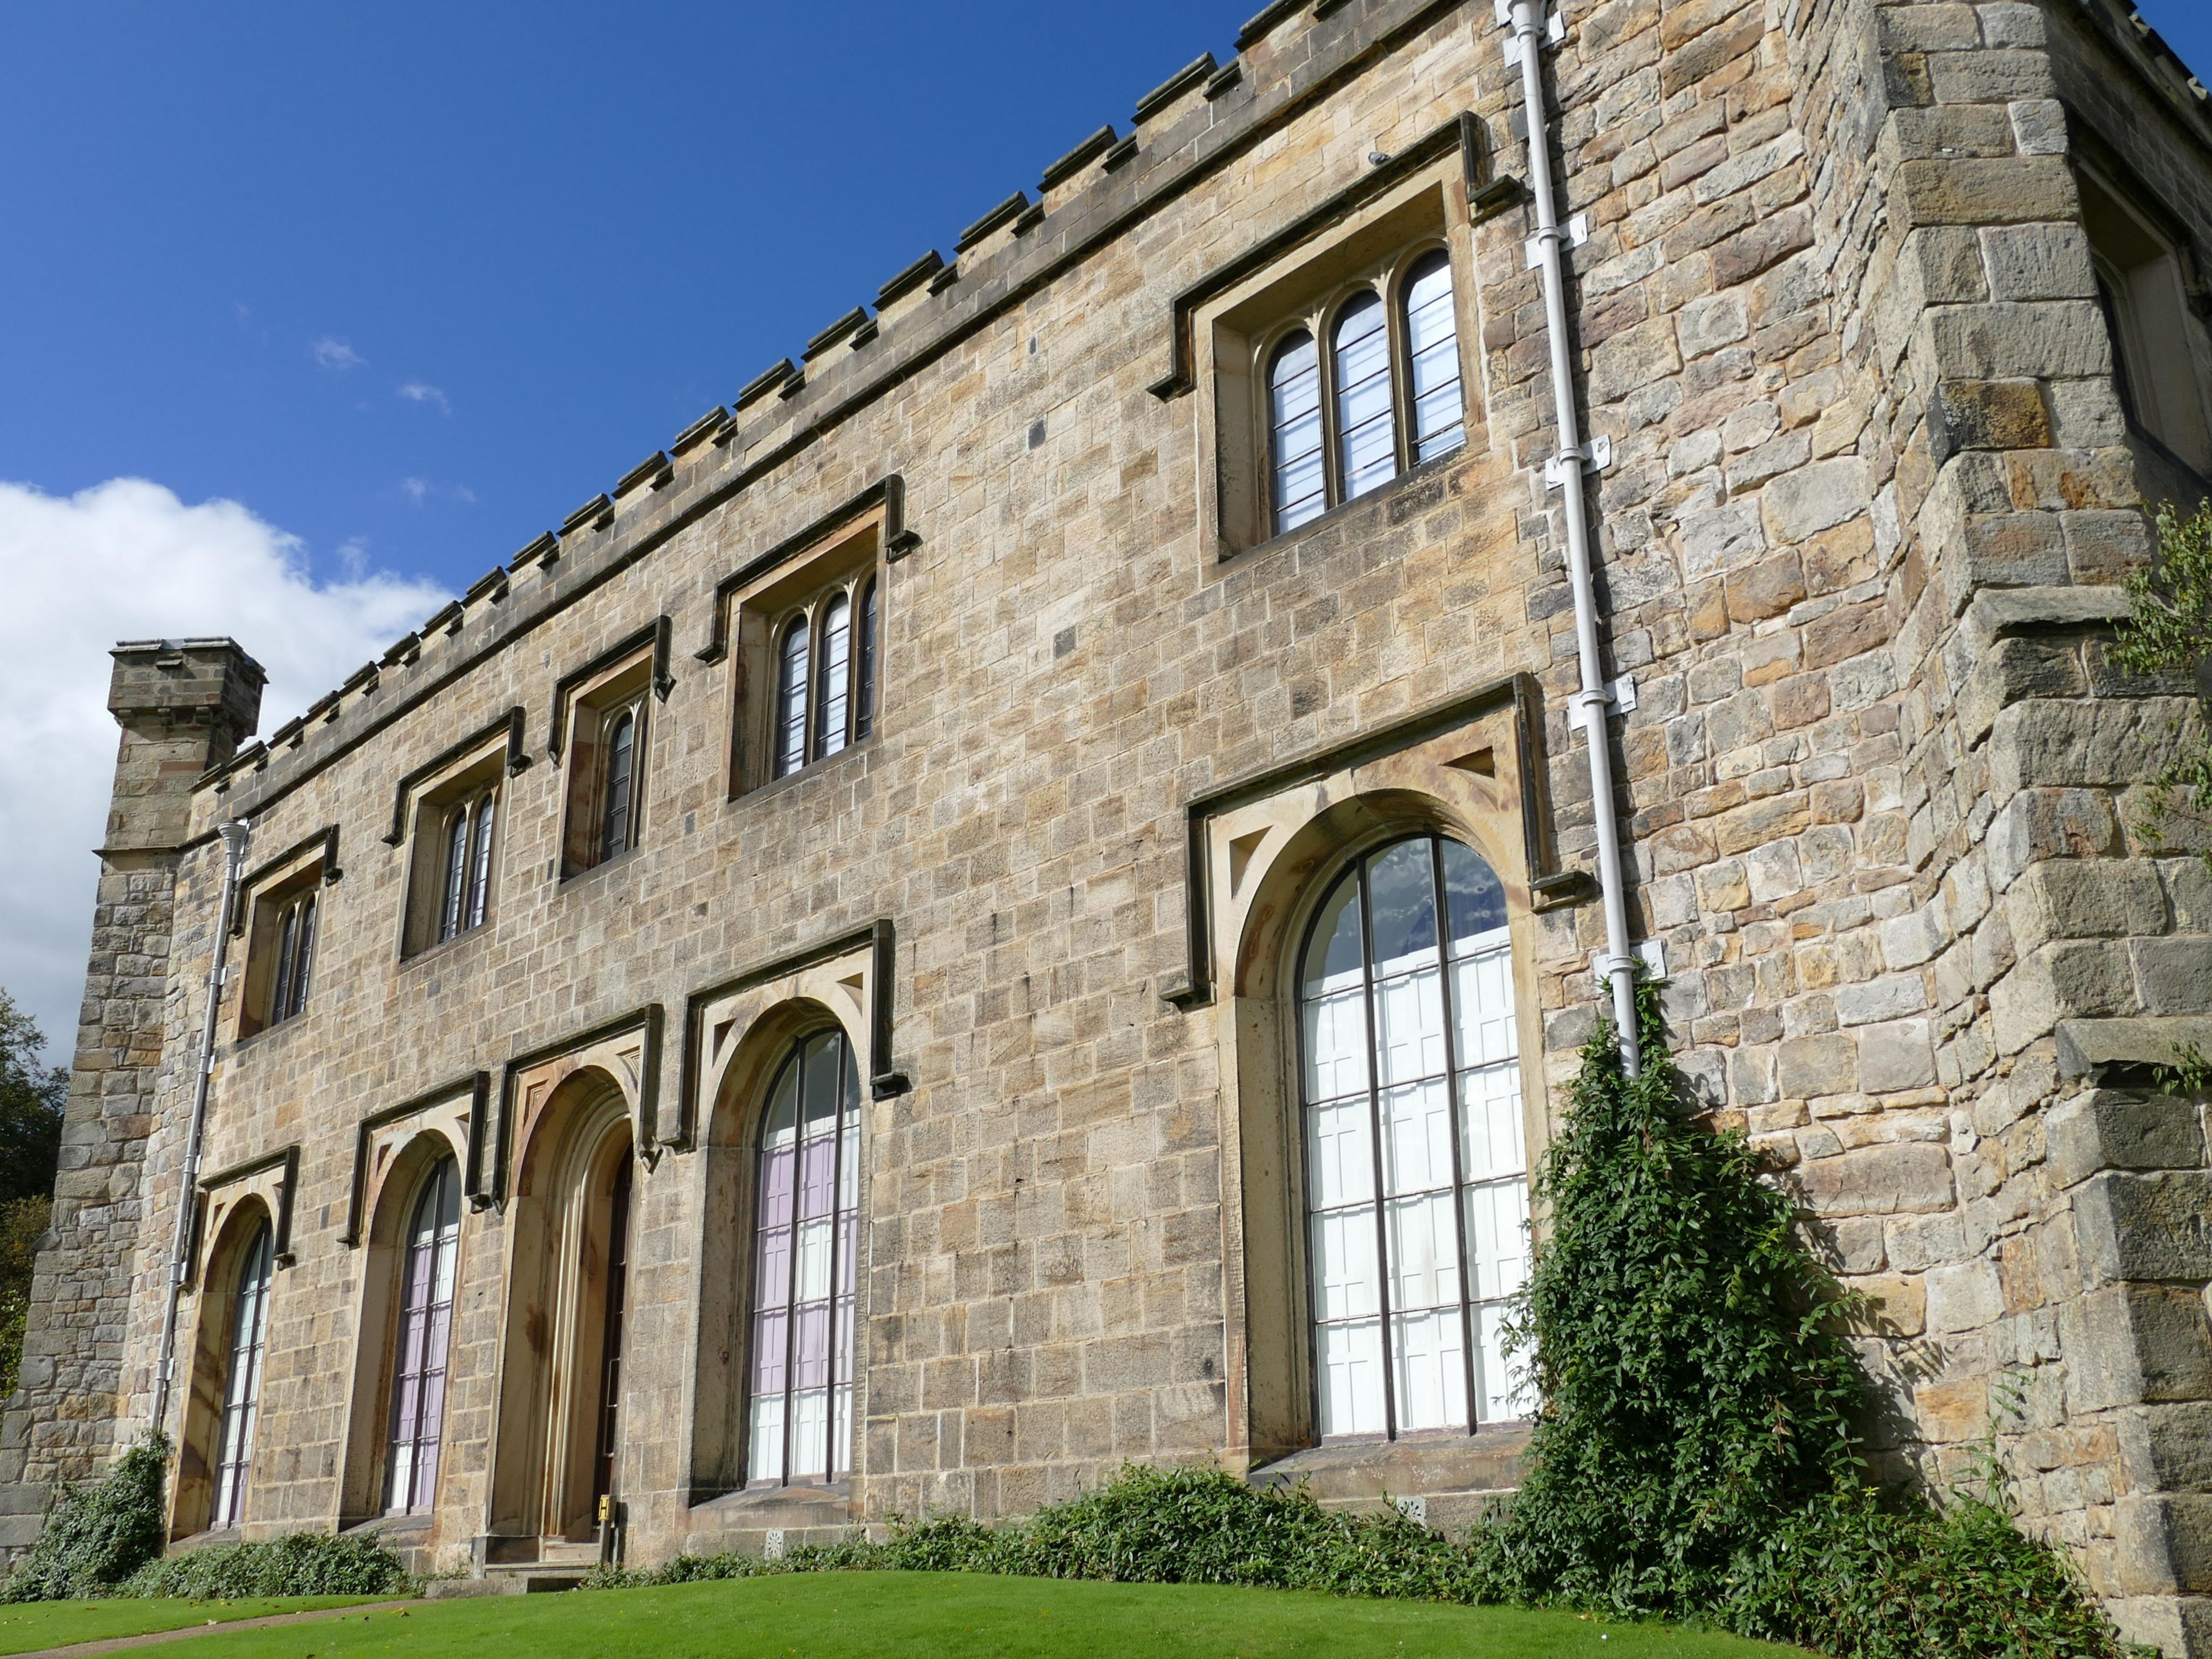 Towneley Hall, historic house and parklands in Burnley